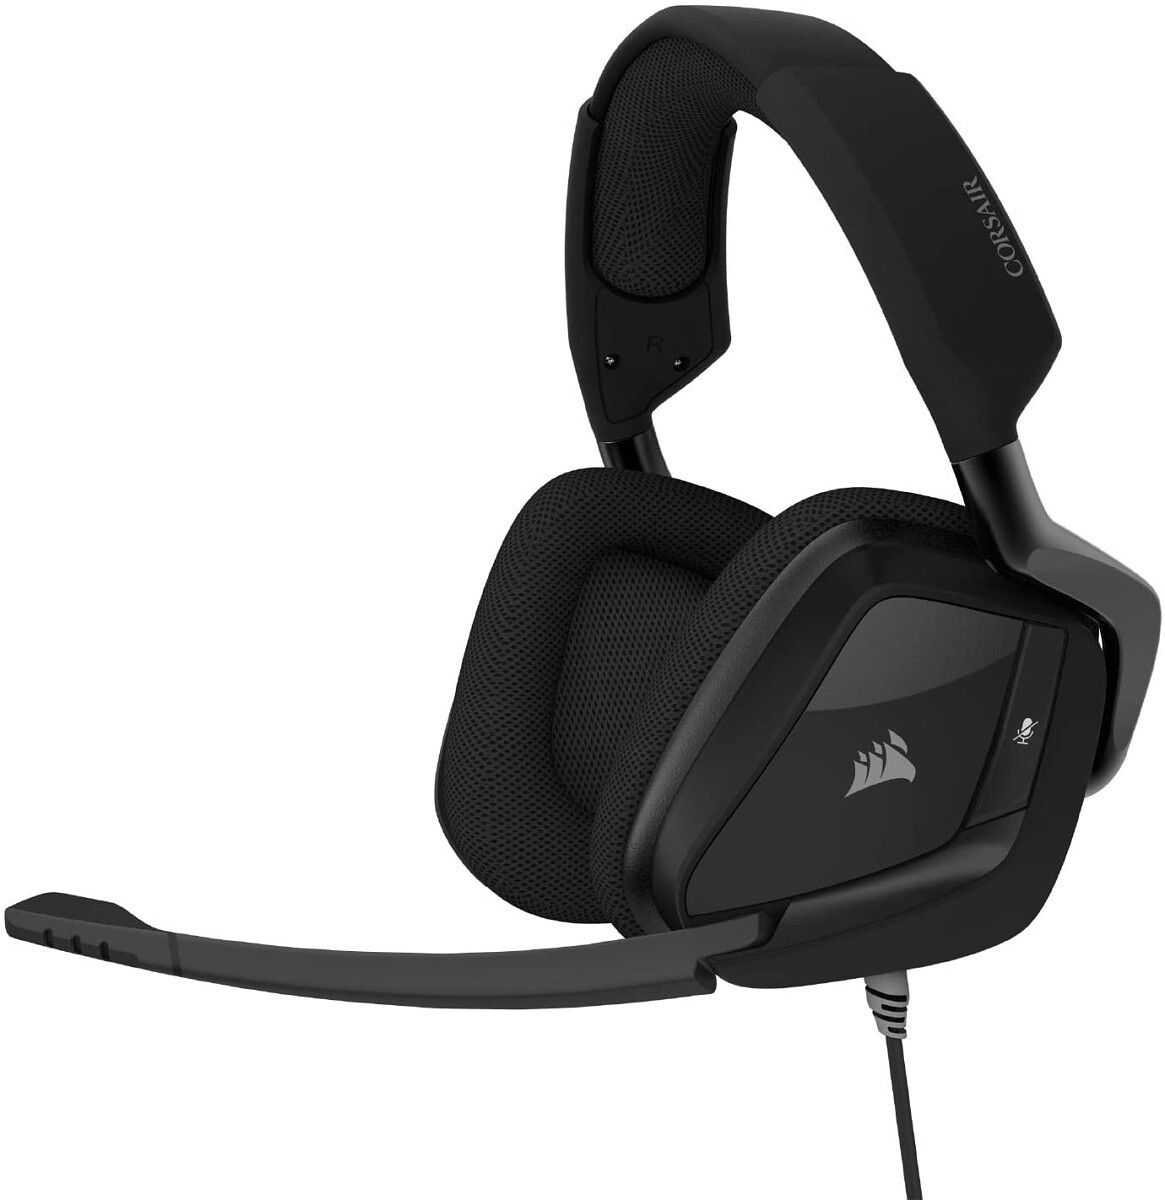 Corsair always has quality headsets, and those that play their Switch at home can enjoy the Corsair Void RGB Elite. This headset offers quality sound and some nice looking lights to boot.